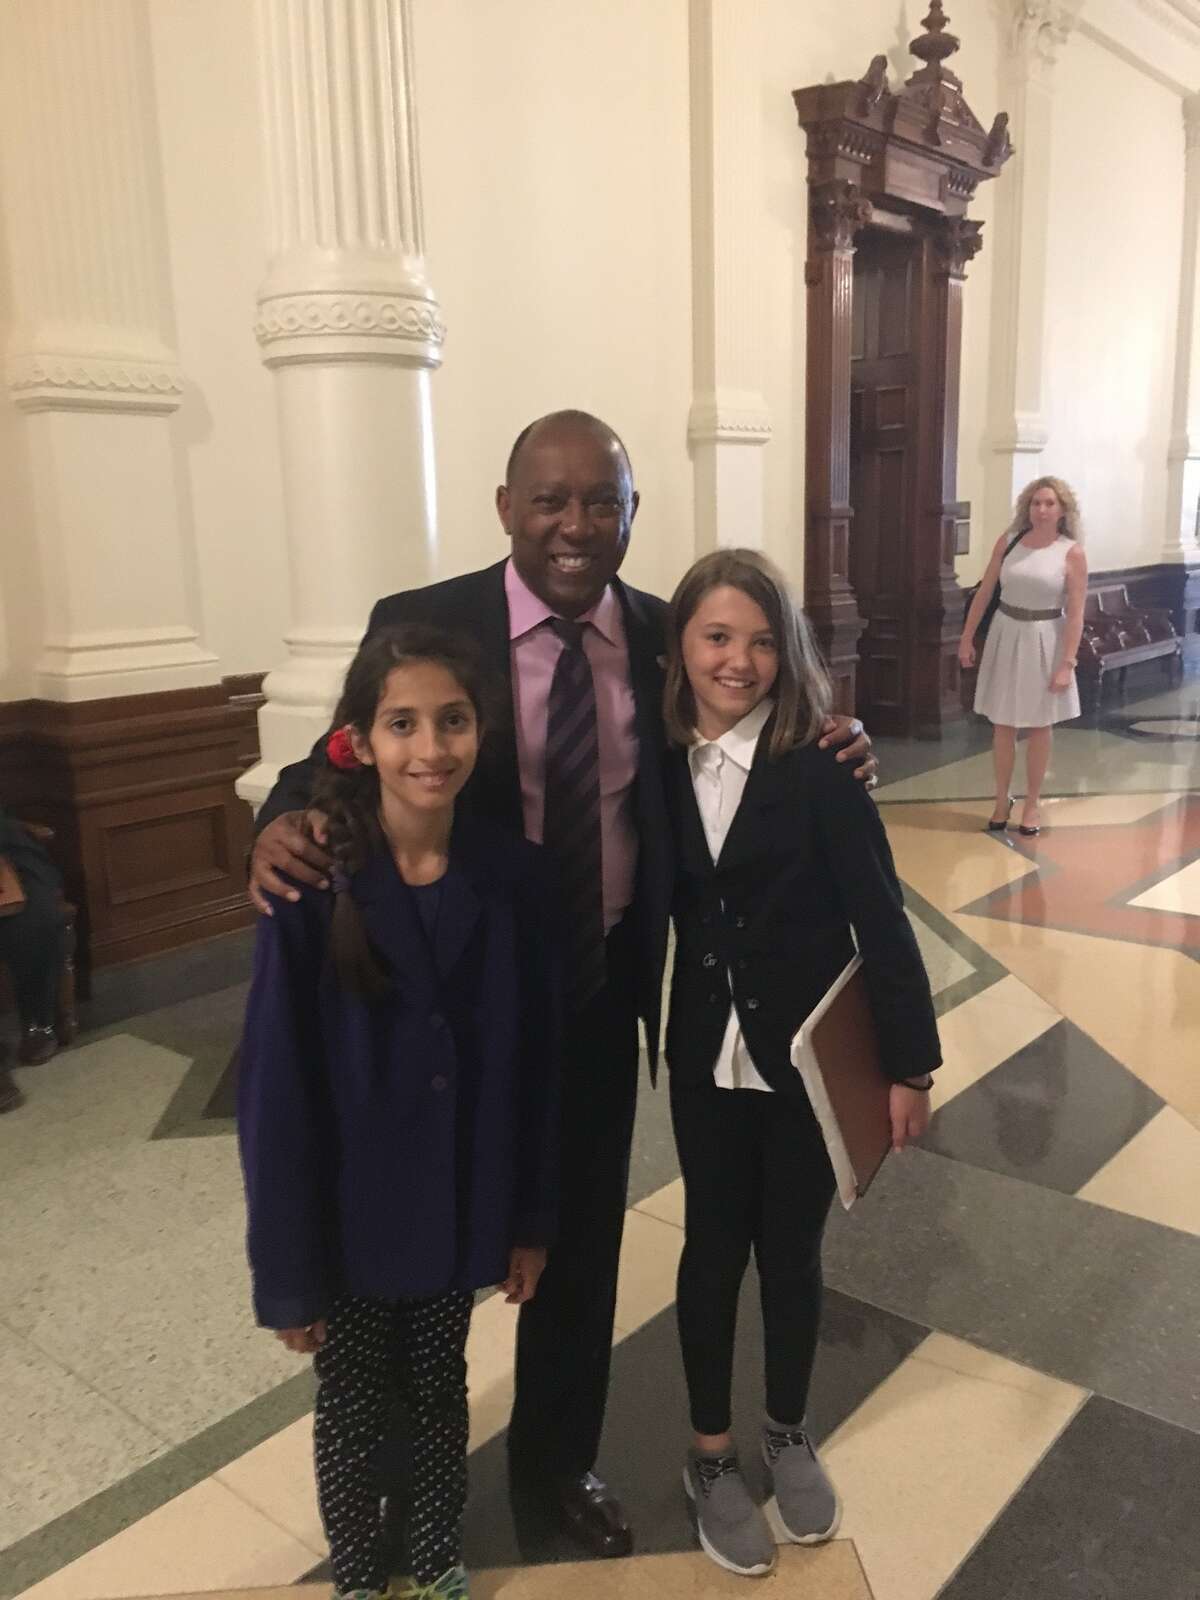 Houston mayor Sylvester Turner crosses paths with Bag Free Bayous' founders Lila Mankad (left) and Caoilin Krathaus (right) at the Texas state capitol.